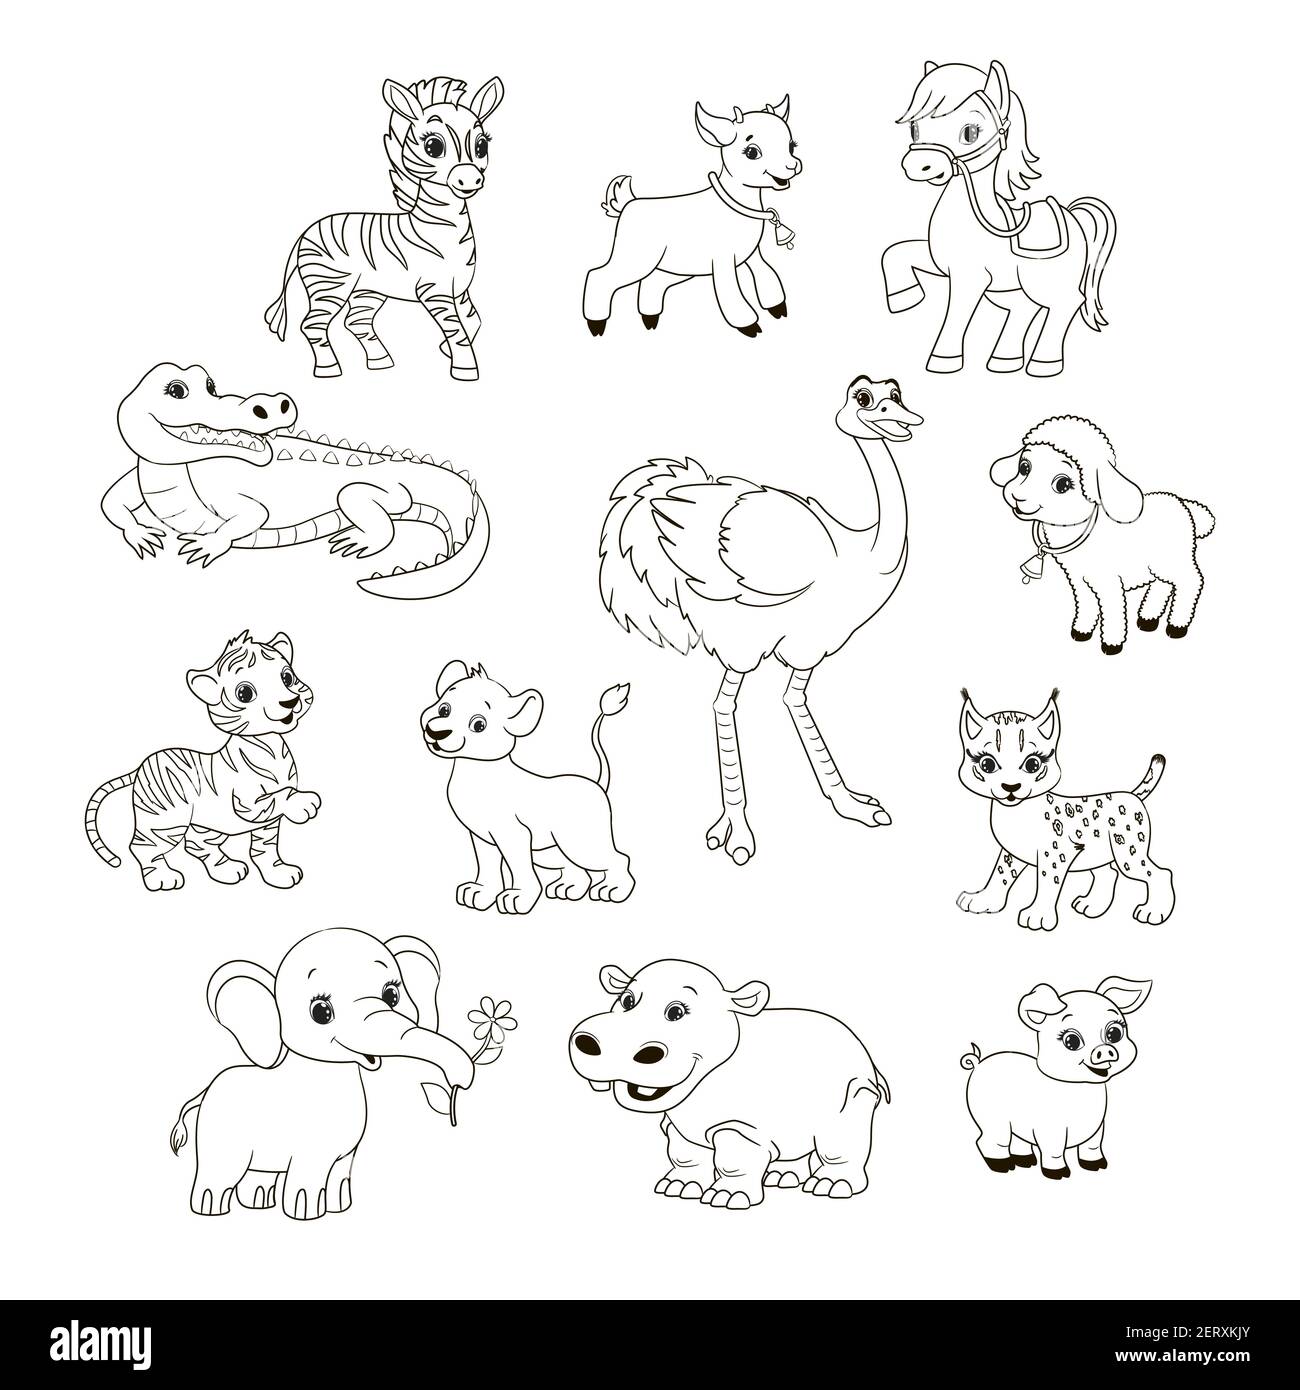 coloring book for children, set of different animals, vector illustration in cartoon style, black and white line art Stock Vector